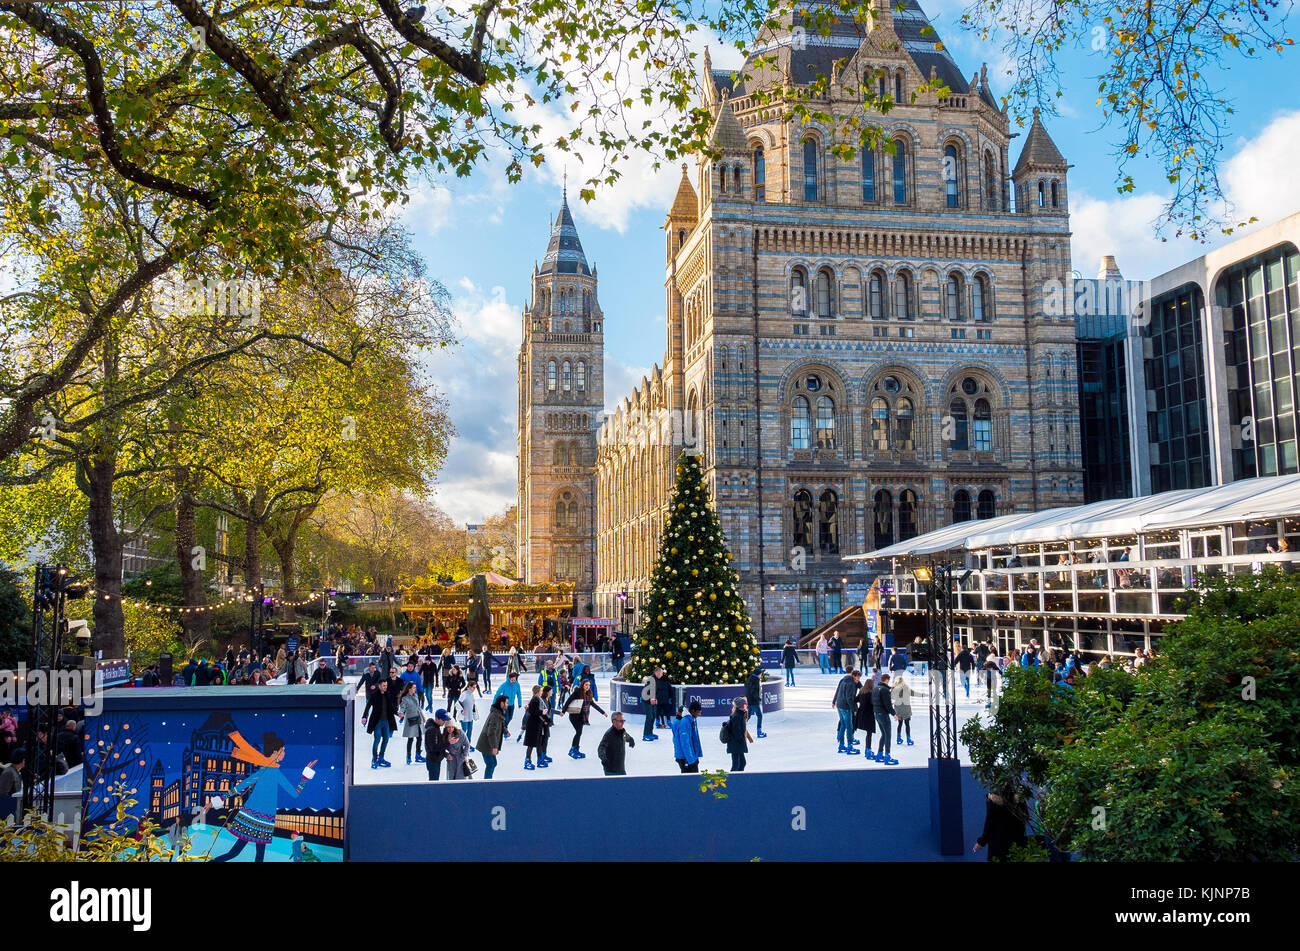 The Christmas Ice Rink at the Natural History Museum in London Stock Photo